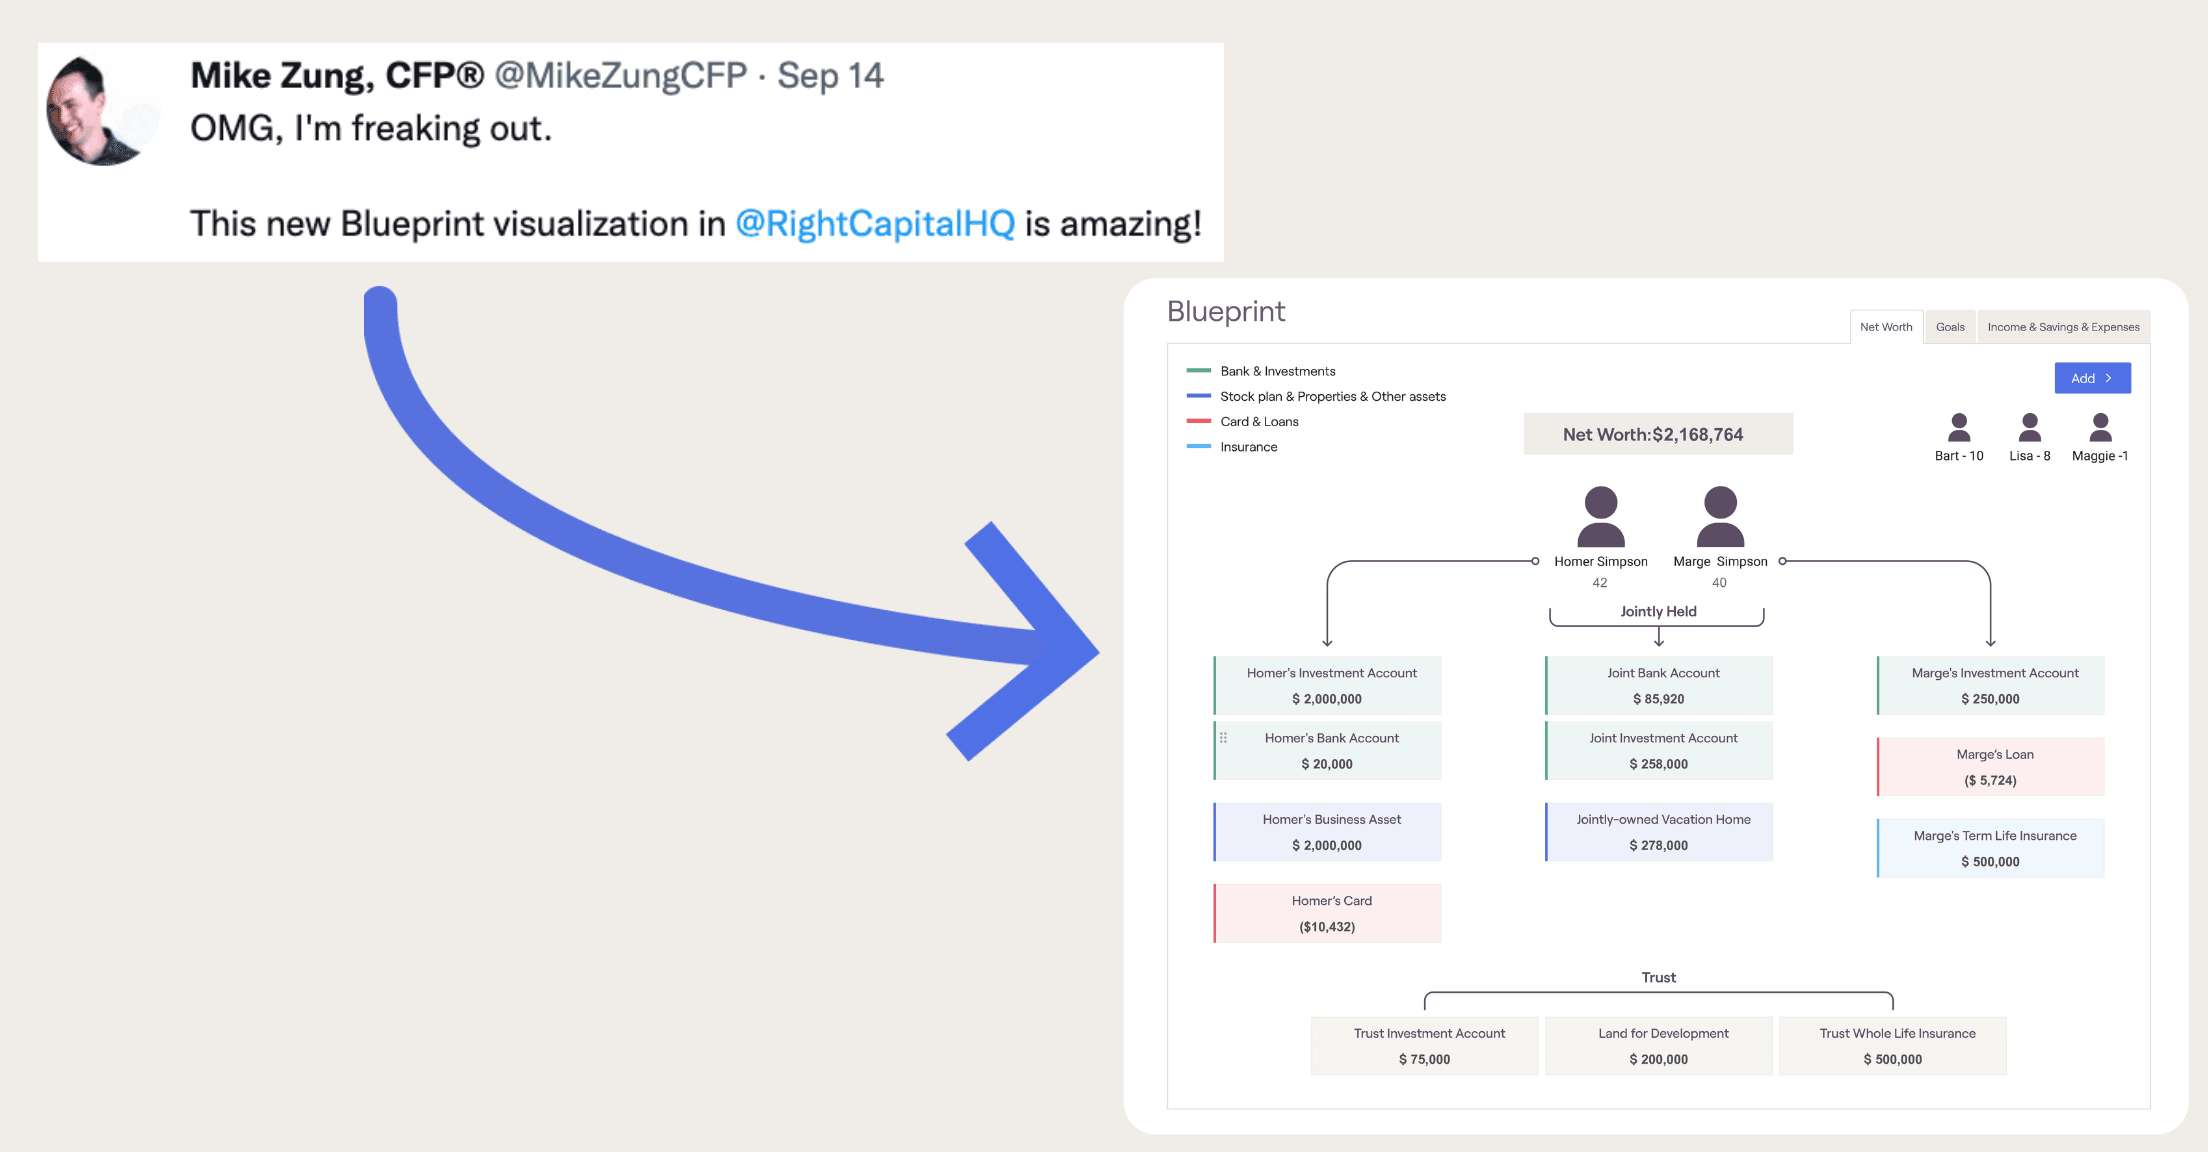 Tweet from advisor calling RightCapital's Blueprint feature "amazing" alongside a screenshot from the financial planning software